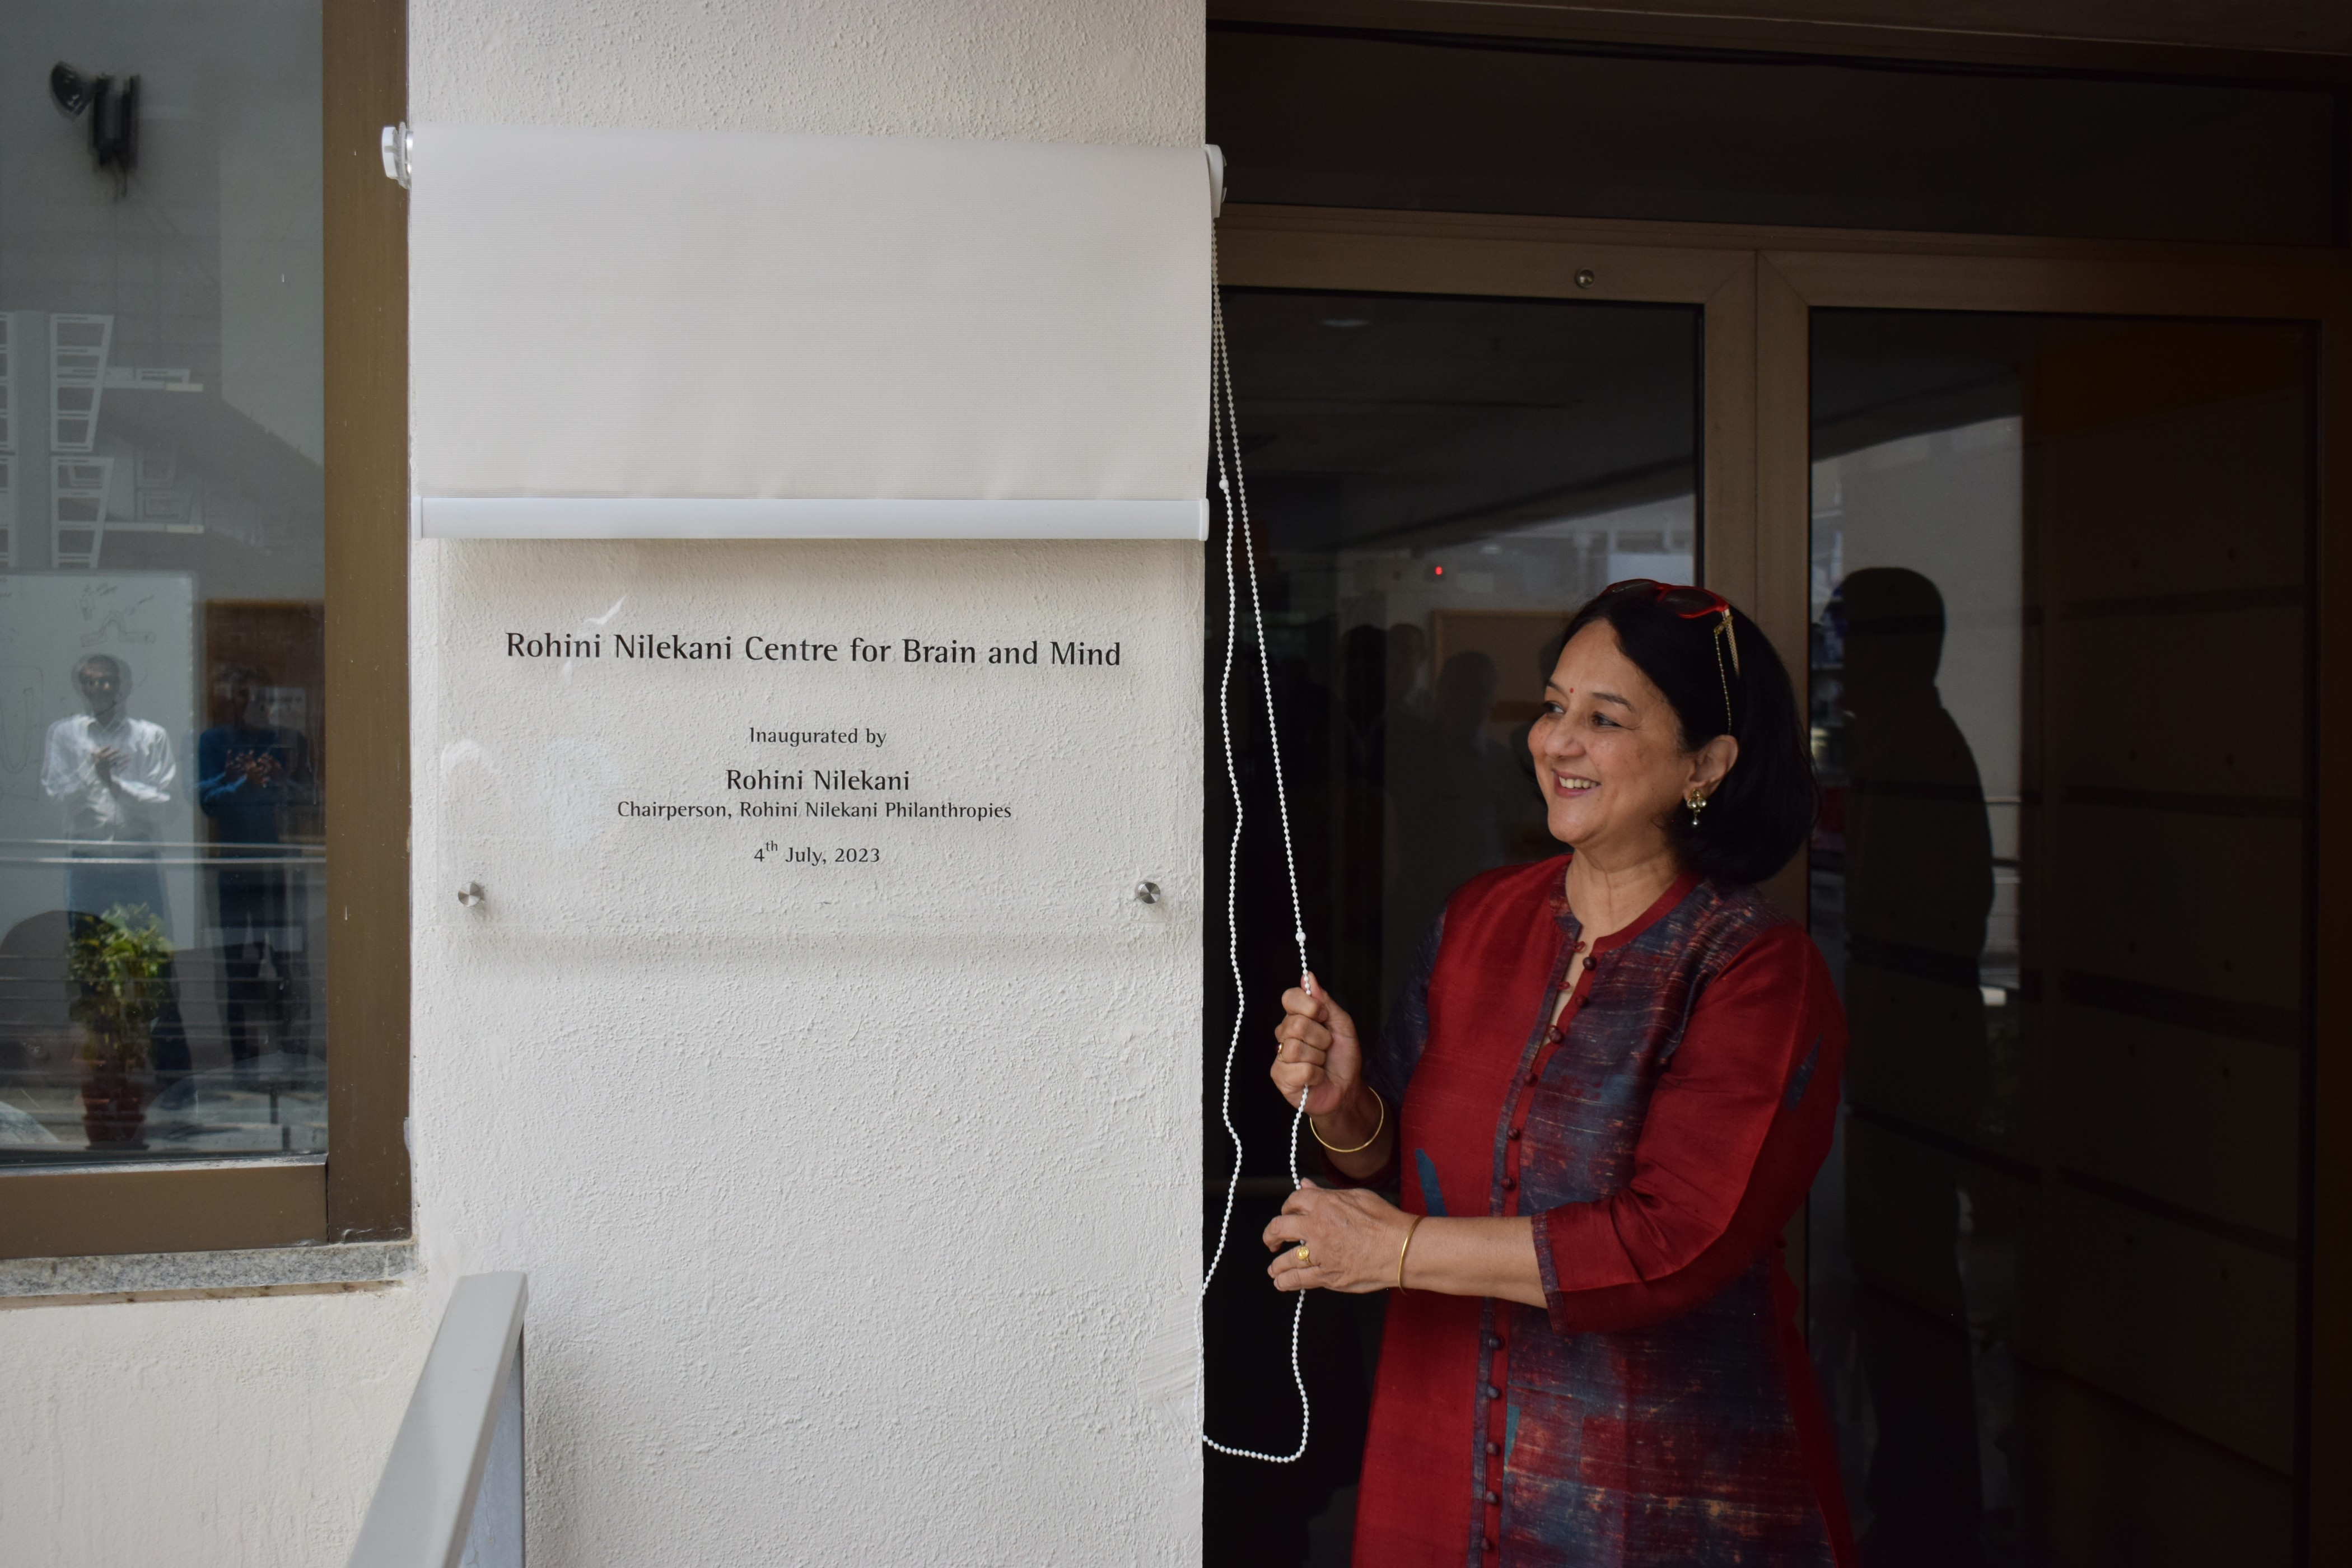 NCBS Launches Rohini Nilekani Centre for Brain and Mind for Research on Severe Mental Illnesses